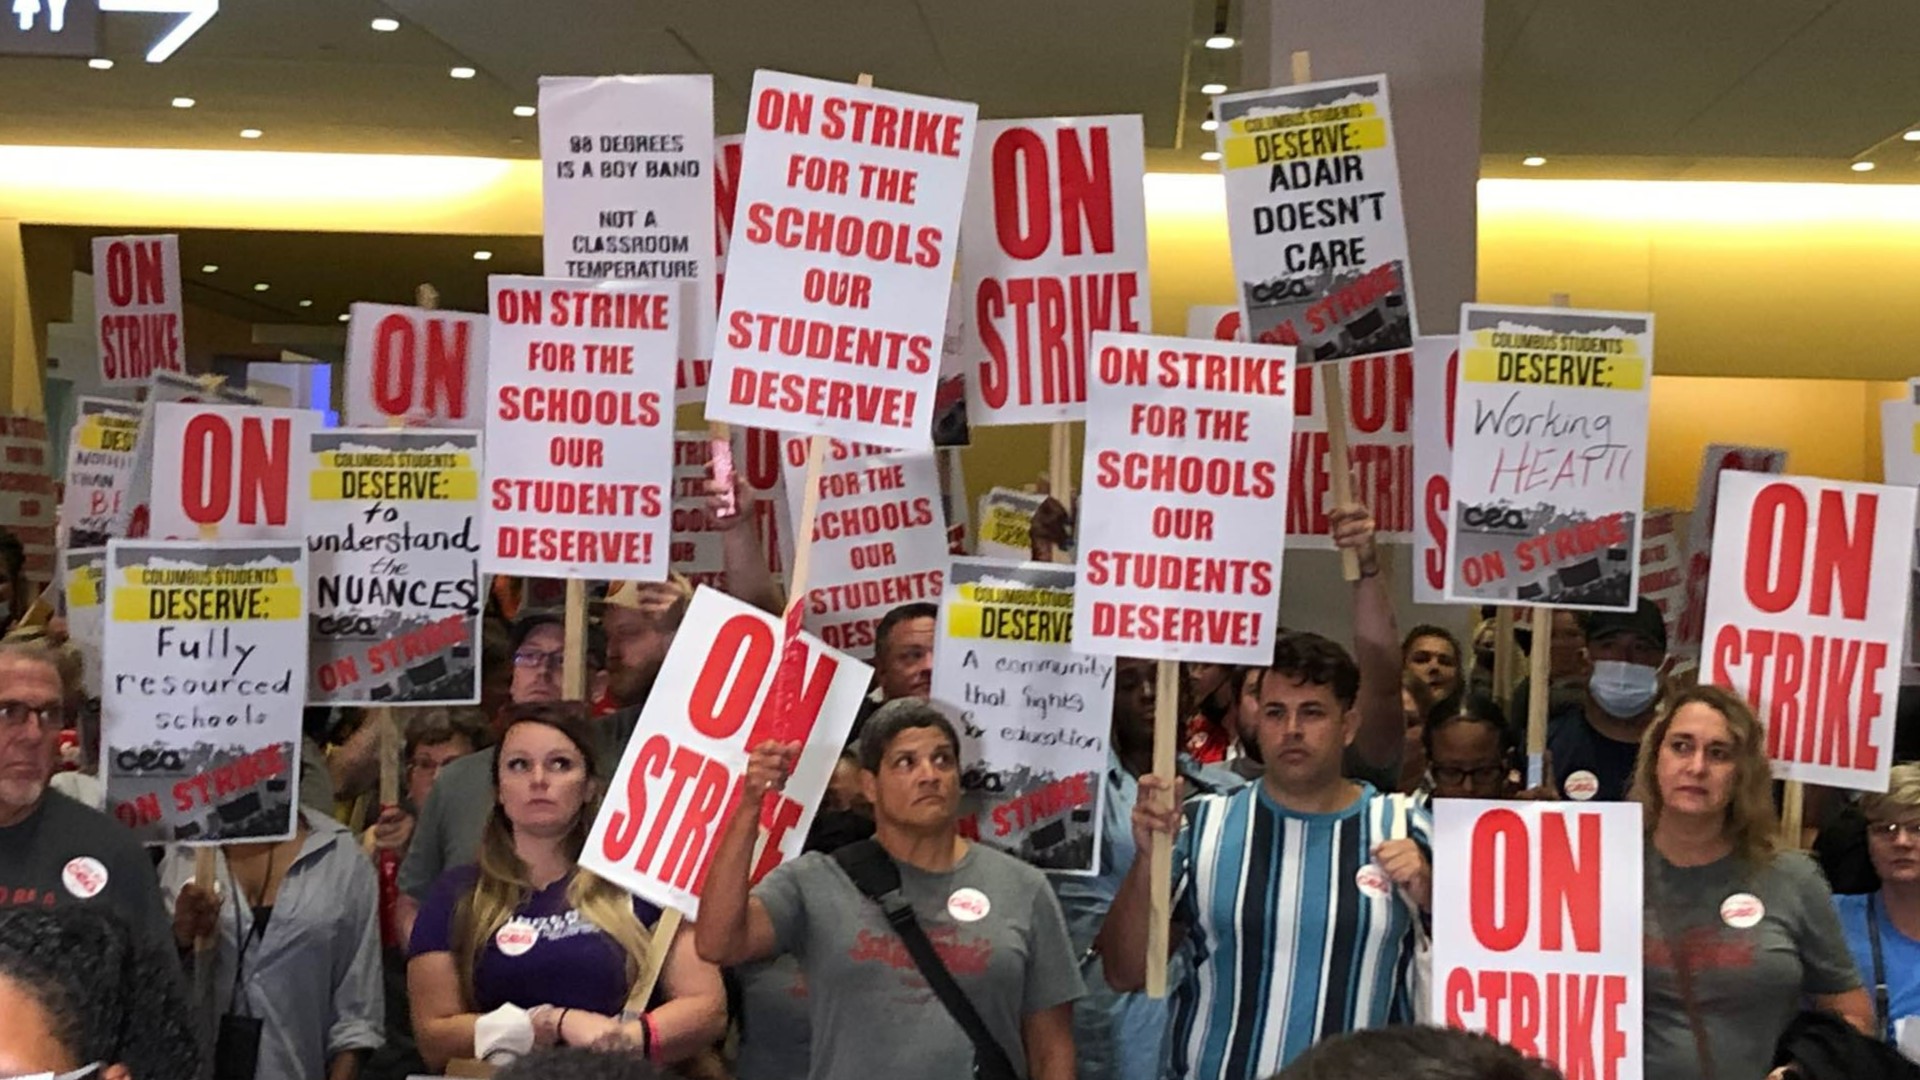 Other repairs languished into this week - when the teachers’ union opted to hit the picket line – going on strike for the first time in more than four decades.